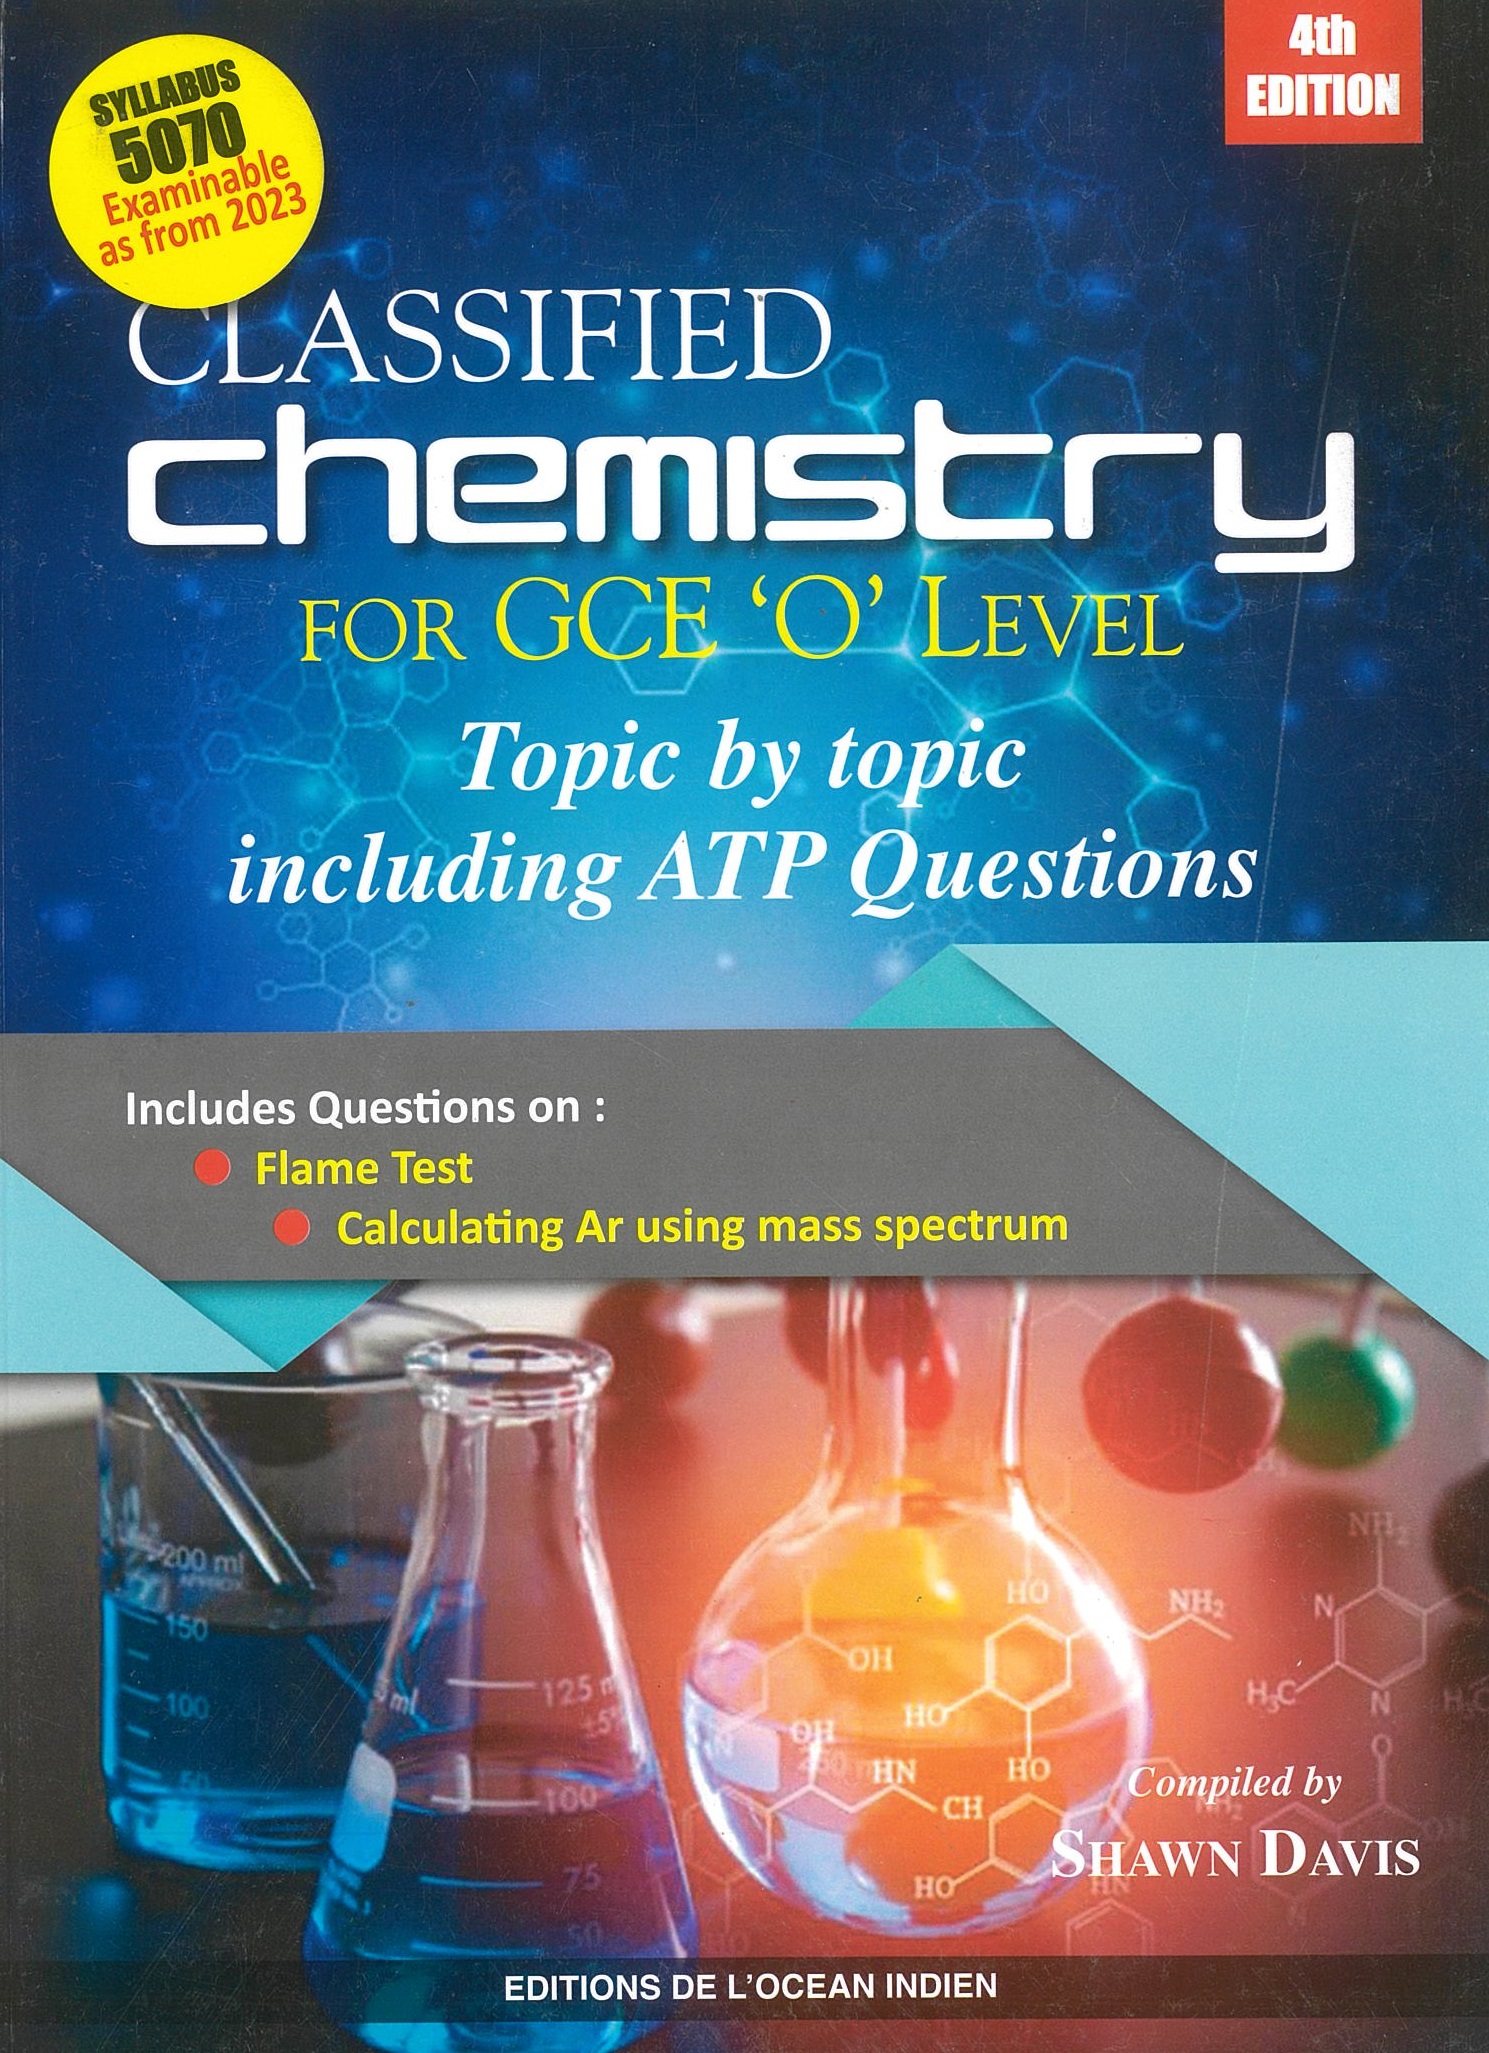 CLASSIFIED CHEMISTRY FOR GCE O LEVEL WITH ATP 2021 - S.DAVIS